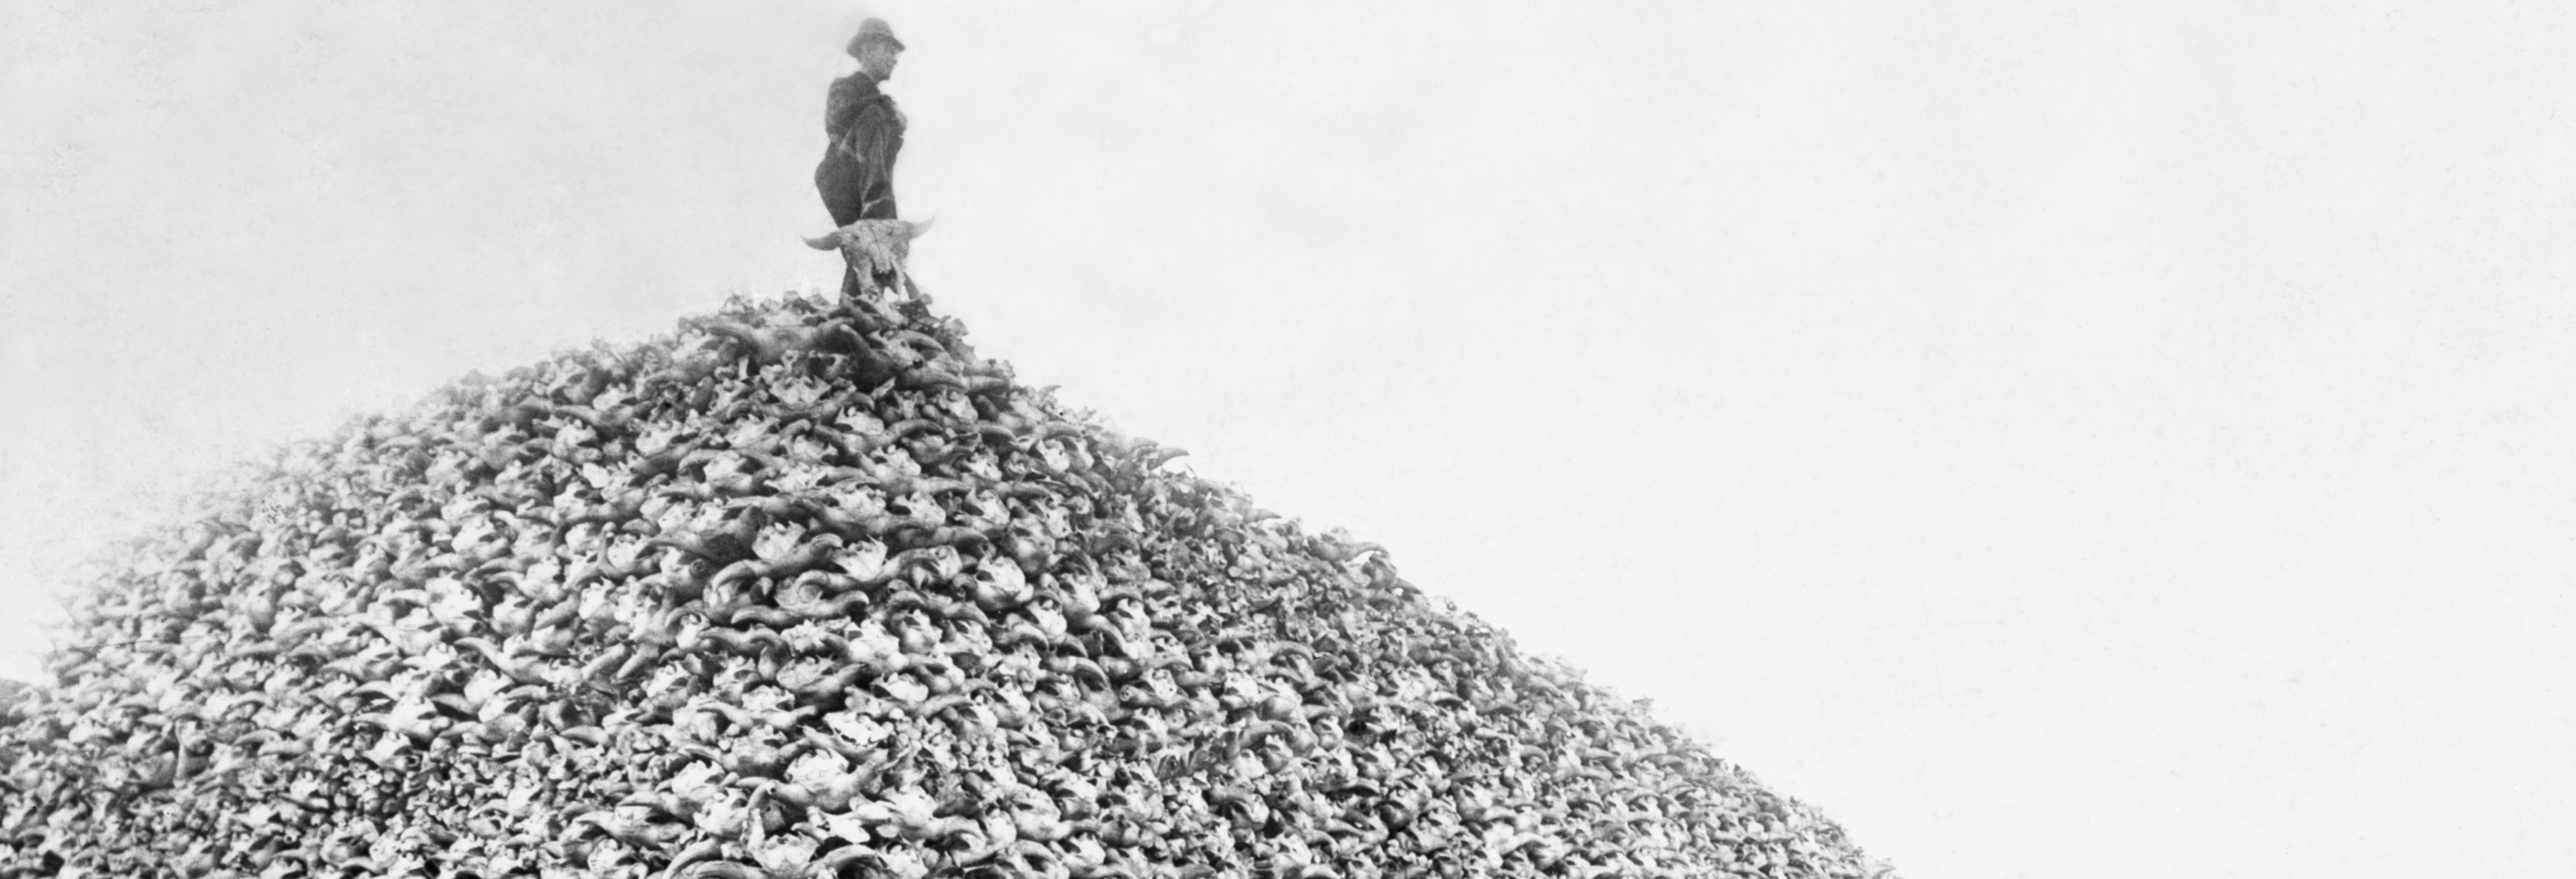 An aged photograph depicts a man in a top hat standing on top of a mound of bison skulls. 